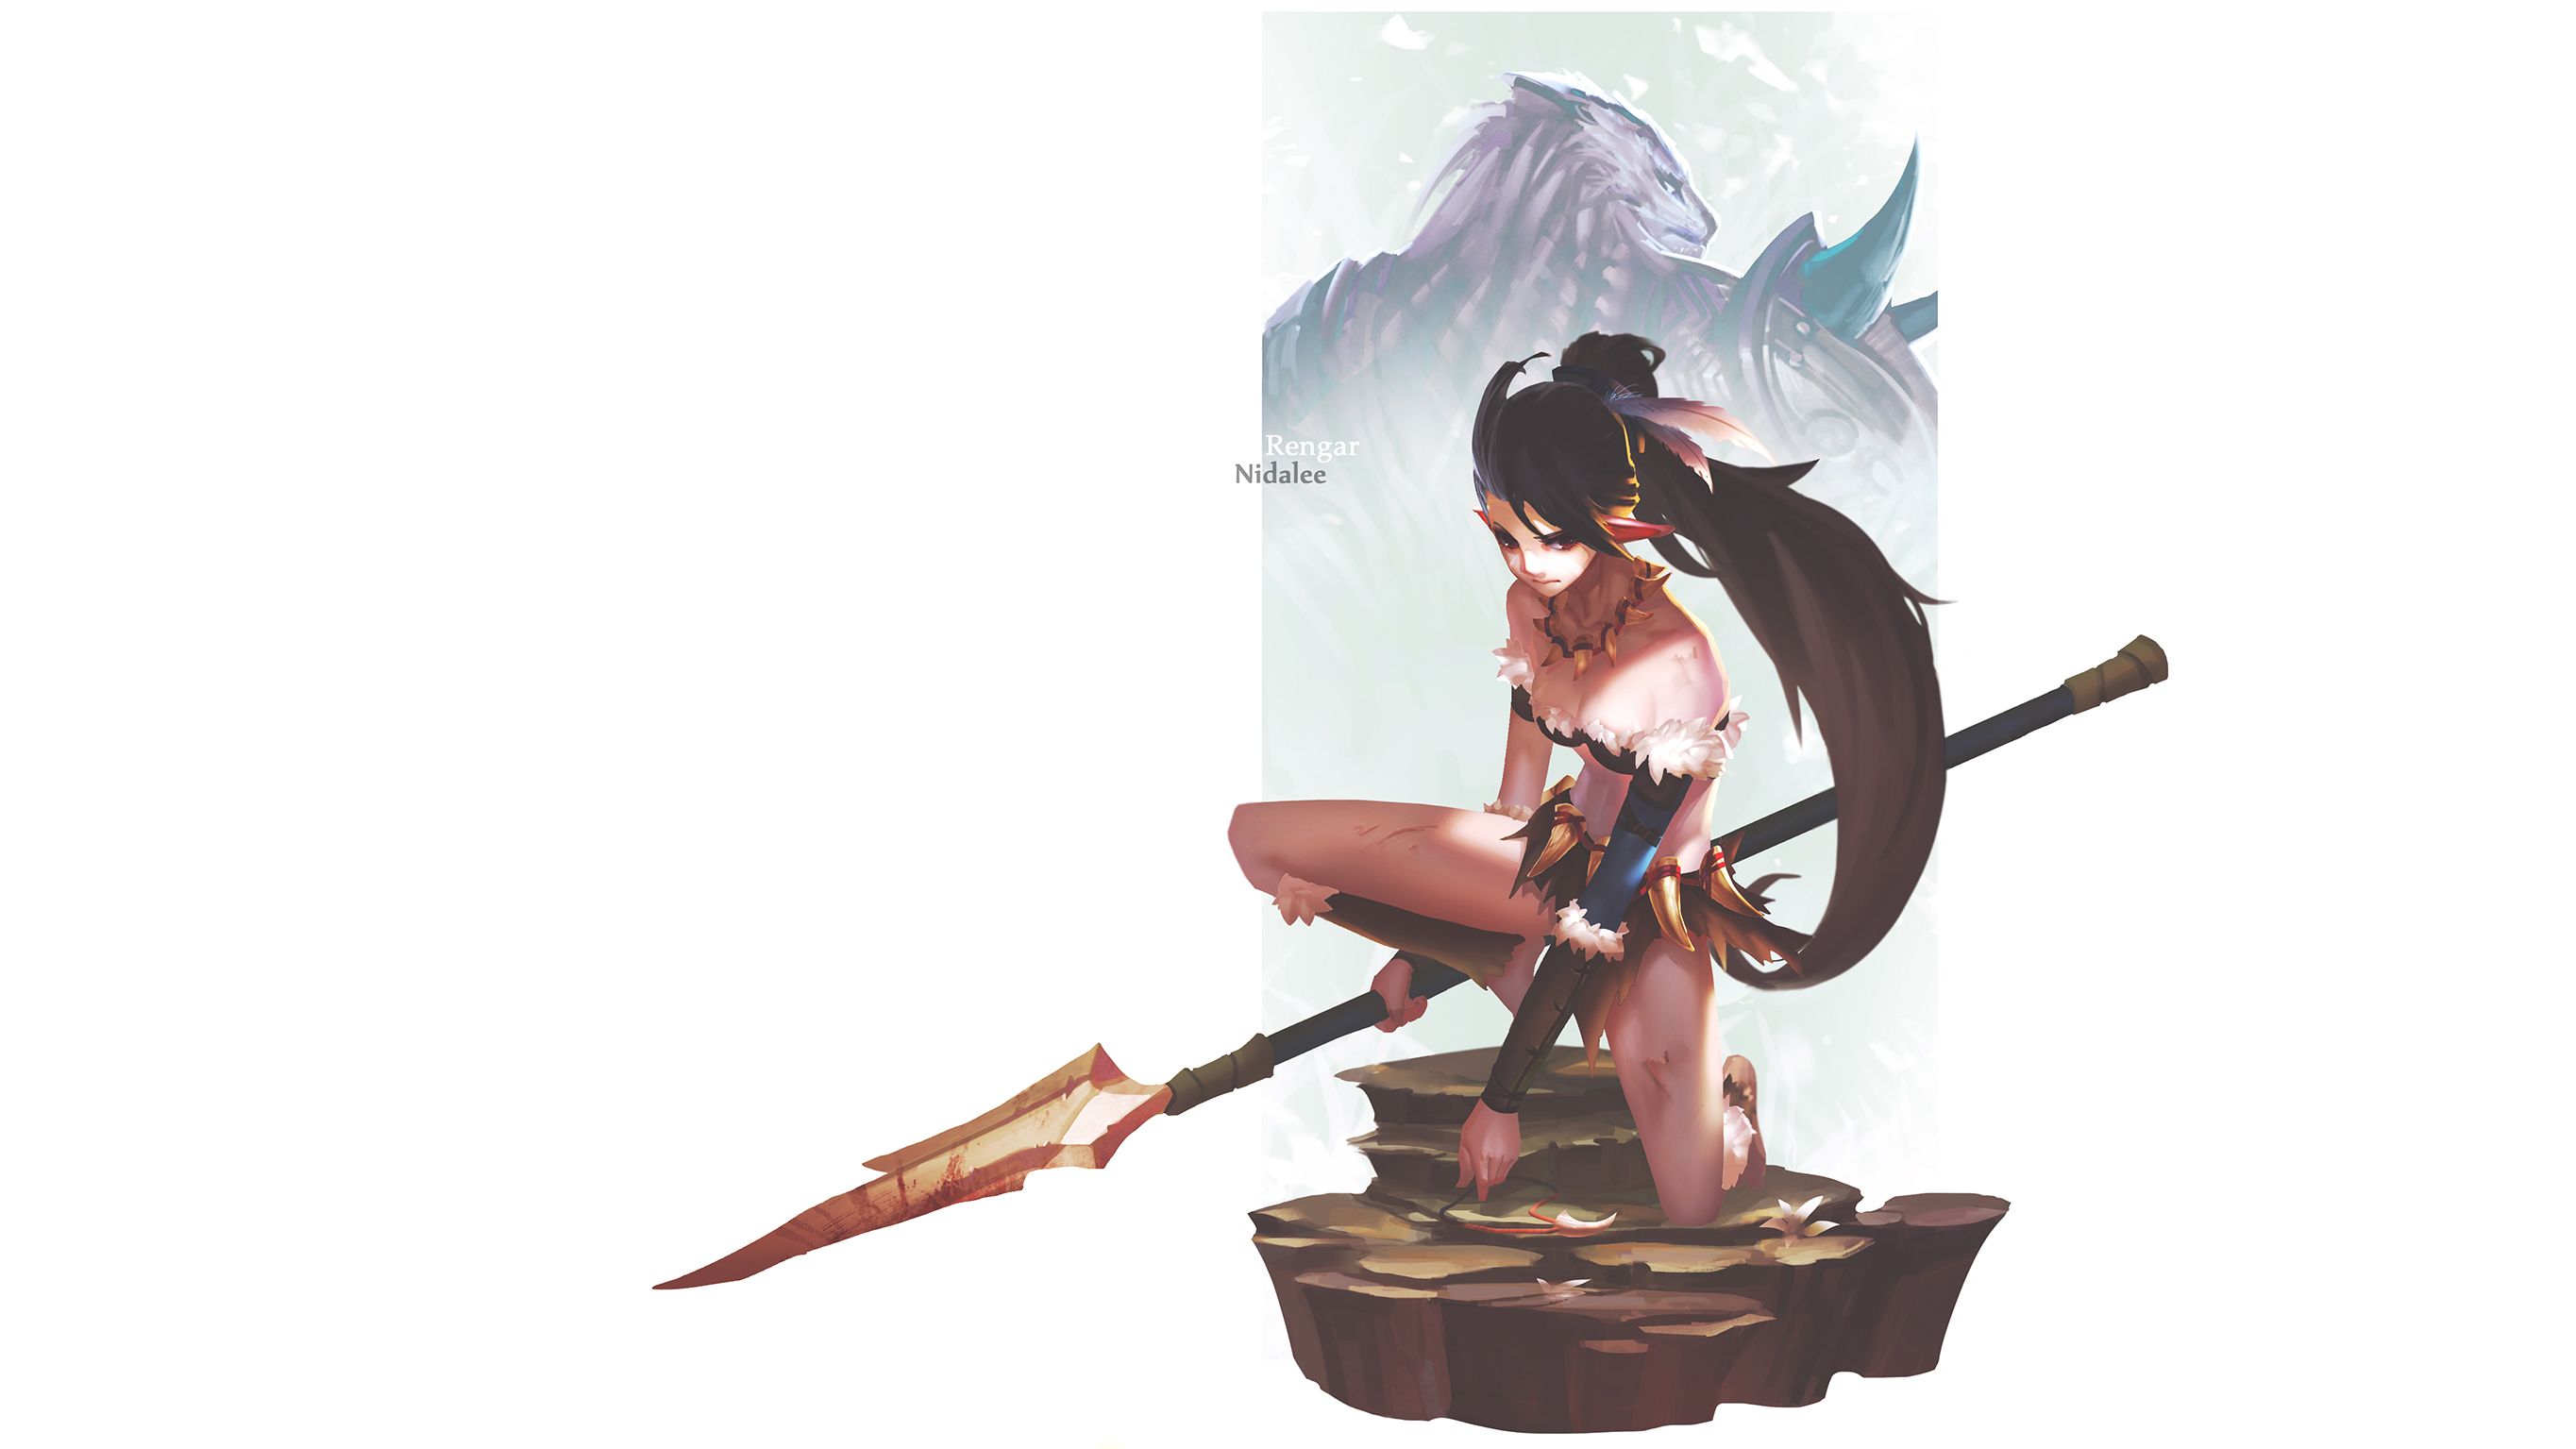 video game, league of legends, nidalee (league of legends), rengar (league of legends), spear